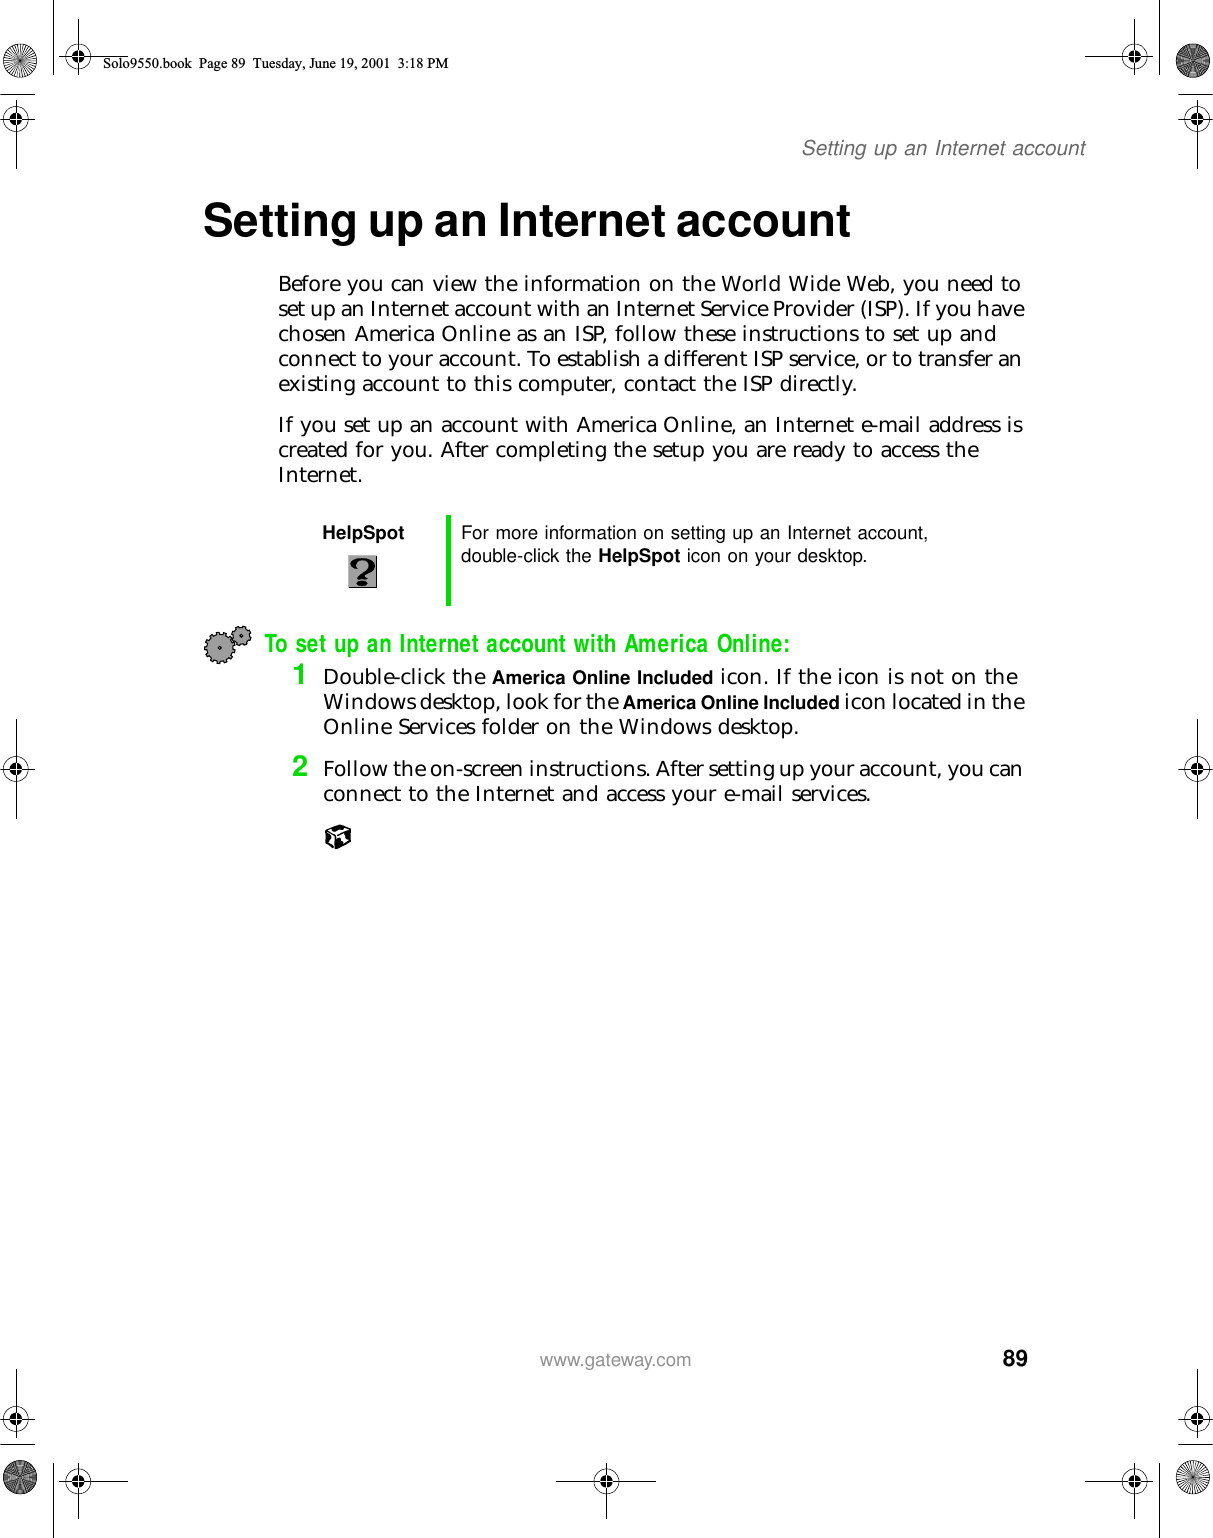 89Setting up an Internet accountwww.gateway.comSetting up an Internet accountBefore you can view the information on the World Wide Web, you need to set up an Internet account with an Internet Service Provider (ISP). If you have chosen America Online as an ISP, follow these instructions to set up and connect to your account. To establish a different ISP service, or to transfer an existing account to this computer, contact the ISP directly.If you set up an account with America Online, an Internet e-mail address is created for you. After completing the setup you are ready to access the Internet.To set up an Internet account with America Online:1Double-click the America Online Included icon. If the icon is not on the Windows desktop, look for the America Online Included icon located in the Online Services folder on the Windows desktop.2Follow the on-screen instructions. After setting up your account, you can connect to the Internet and access your e-mail services.HelpSpot For more information on setting up an Internet account, double-click the HelpSpot icon on your desktop.Solo9550.book Page 89 Tuesday, June 19, 2001 3:18 PM